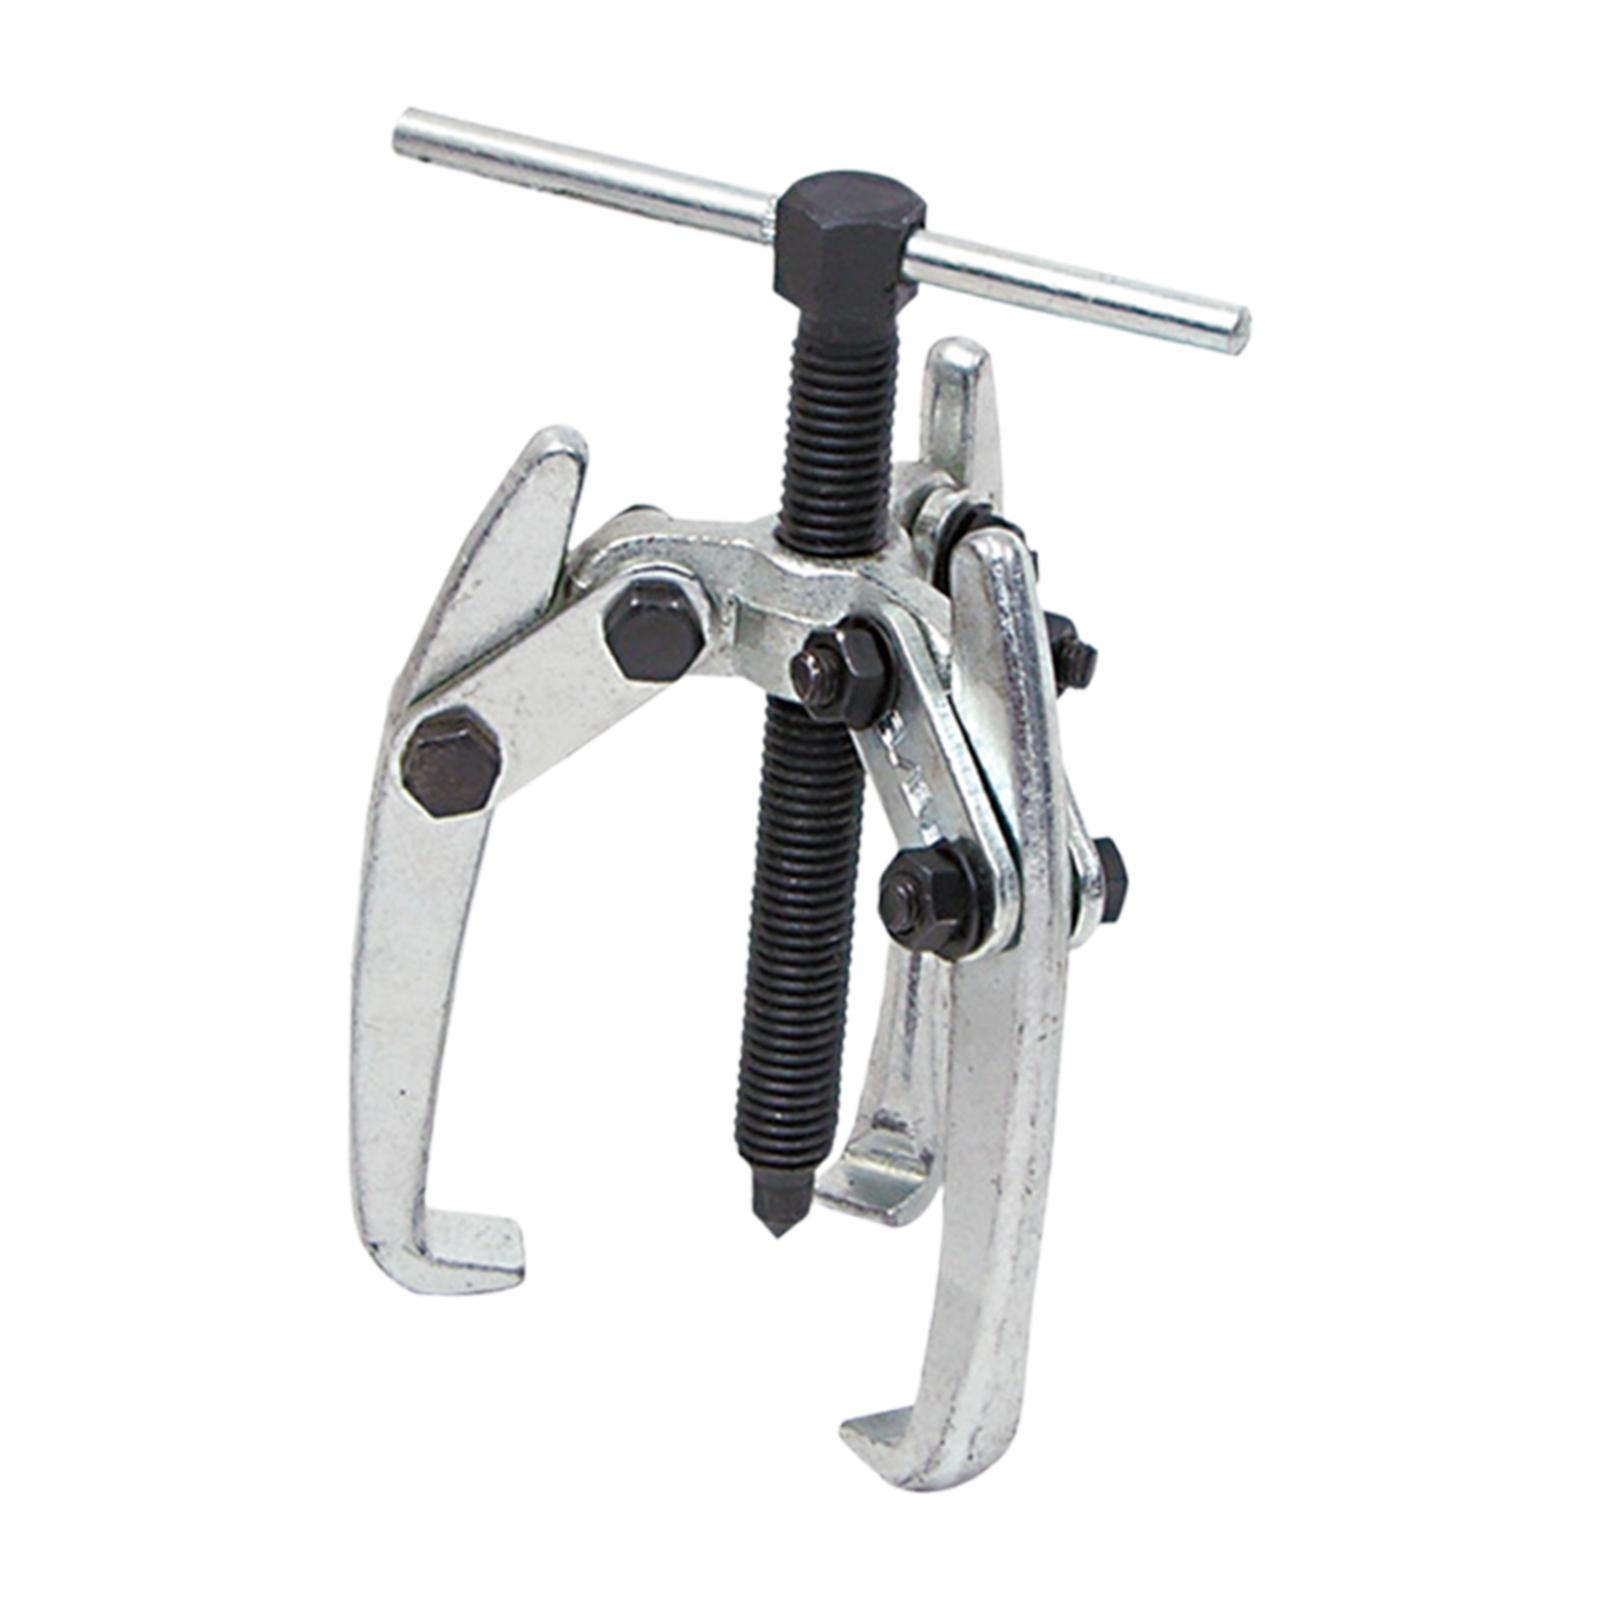 Bearing Gears Puller Jaw Puller Professional Accessories Pump Pulley Remover 3 Jaws 10 to 65mm